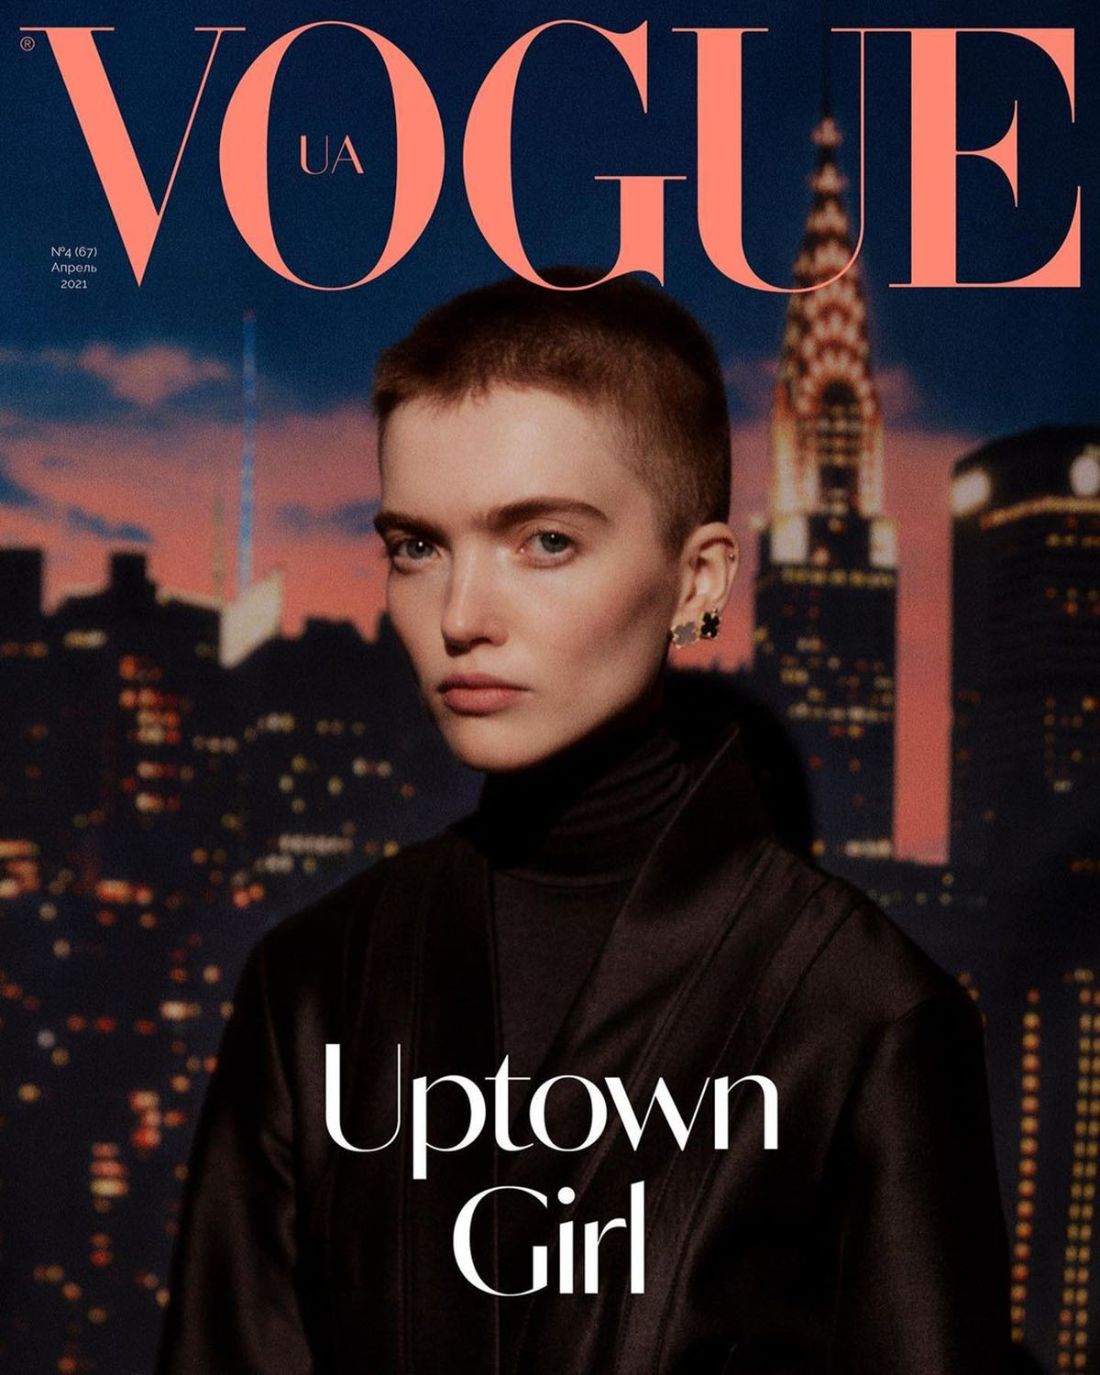 Uptown Girl: Ruth Bell Covers Vogue Ukraine April 2021. Clothing & Accessories: Jacket by Dior; Jewelry by Van Cleef & Arpels